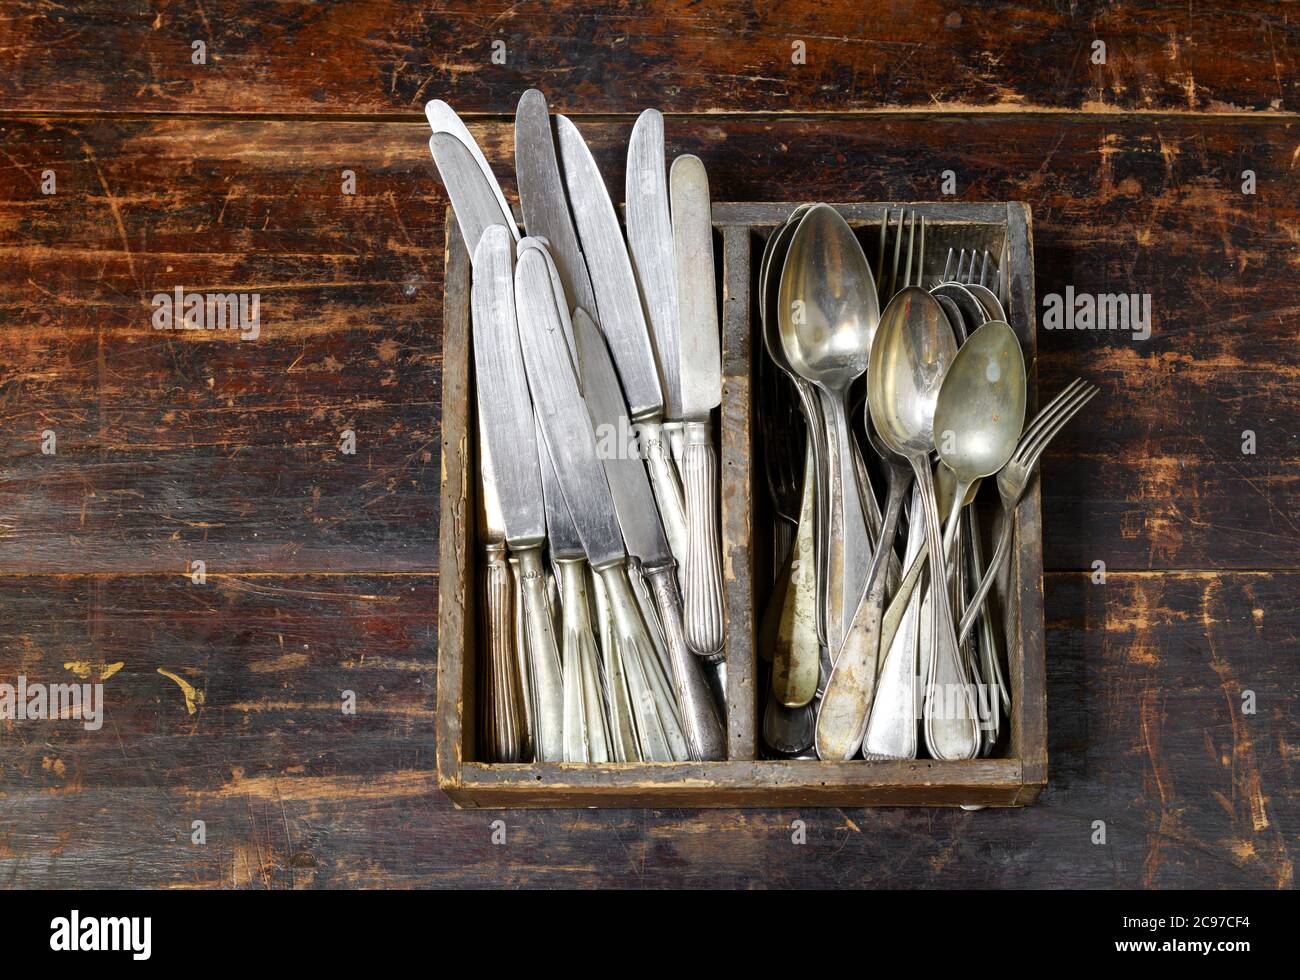 Collection of old vintage cutlery in a wooden tray with assorted silver spoons, knives and forks in an overhead view on an old rustic wooden board Stock Photo